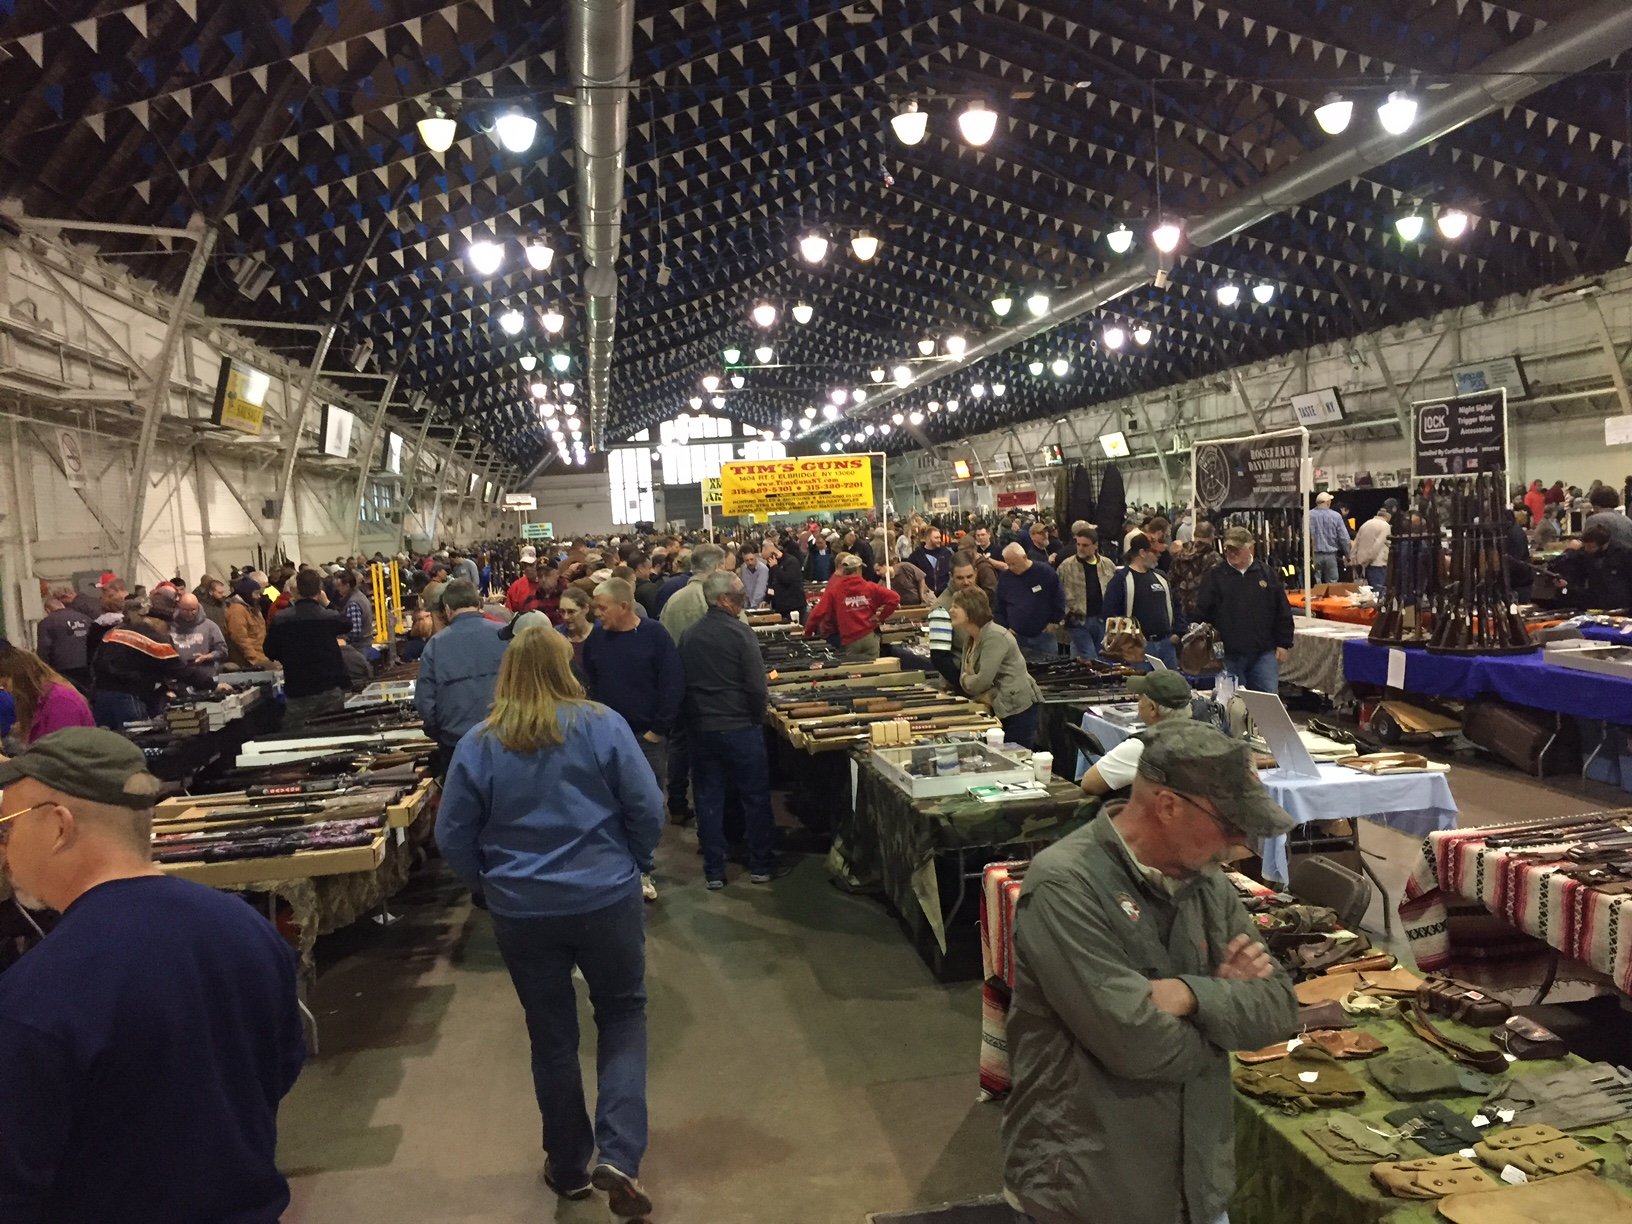 Syracuse Gun Show offering more than 800 exhibits and displays at NYS